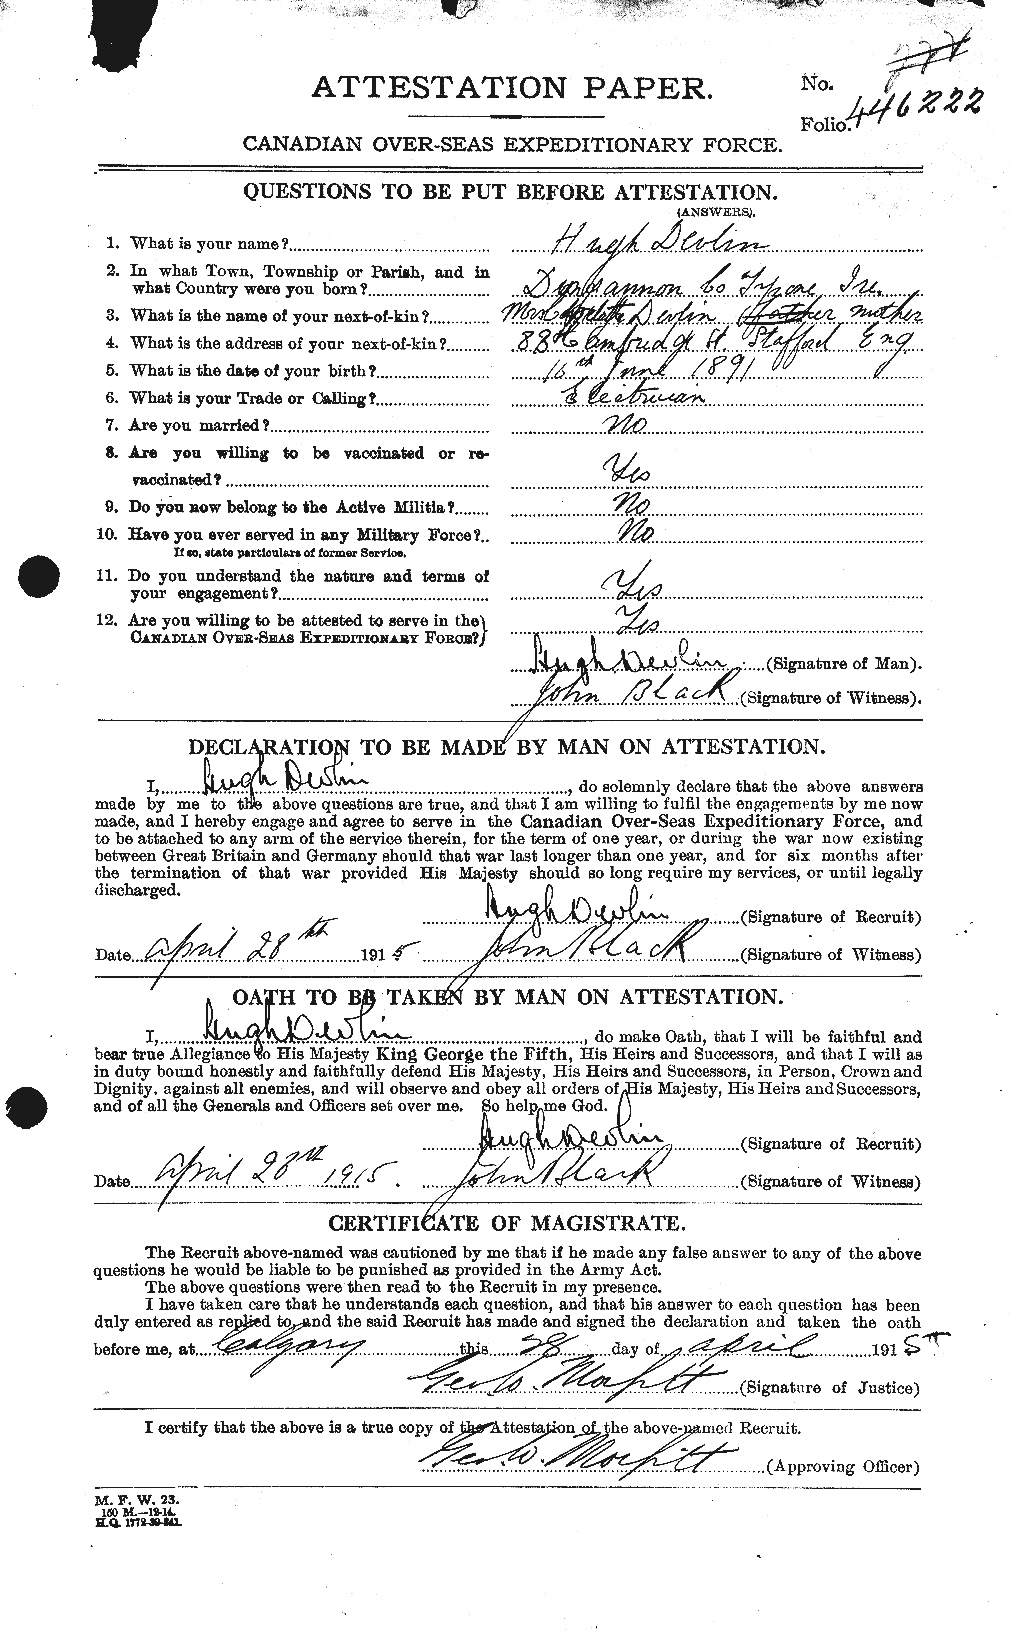 Personnel Records of the First World War - CEF 292184a